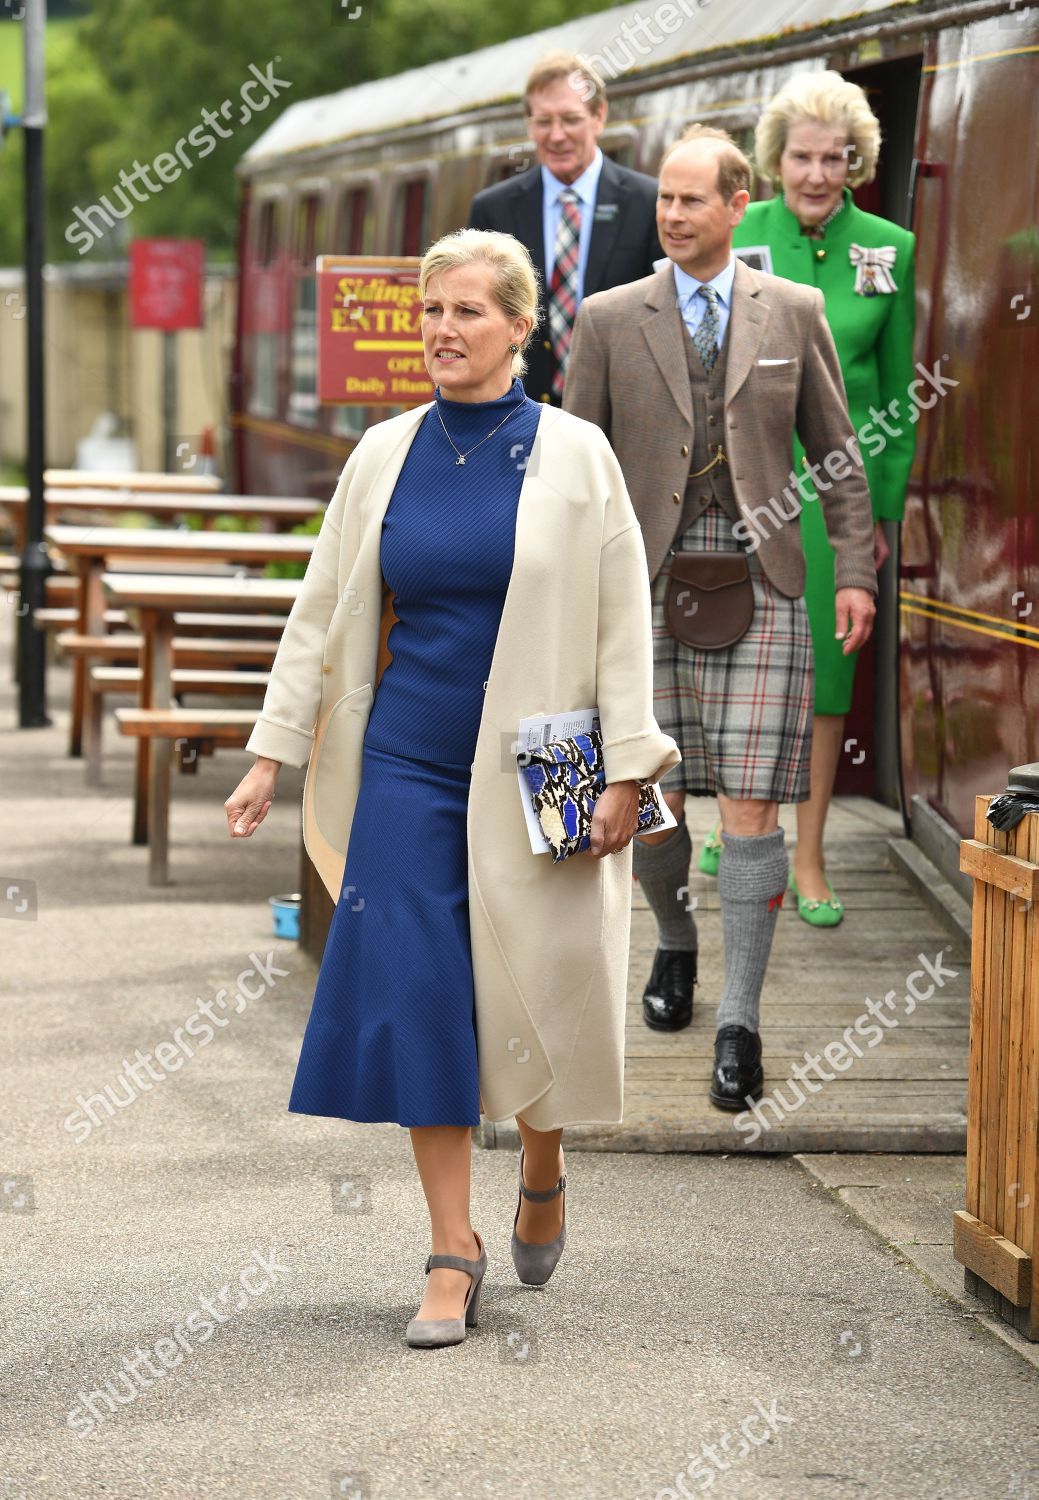 CASA REAL BRITÁNICA - Página 93 Sophie-countess-of-wessex-and-prince-edward-visit-to-scotland-uk-shutterstock-editorial-10326116cj